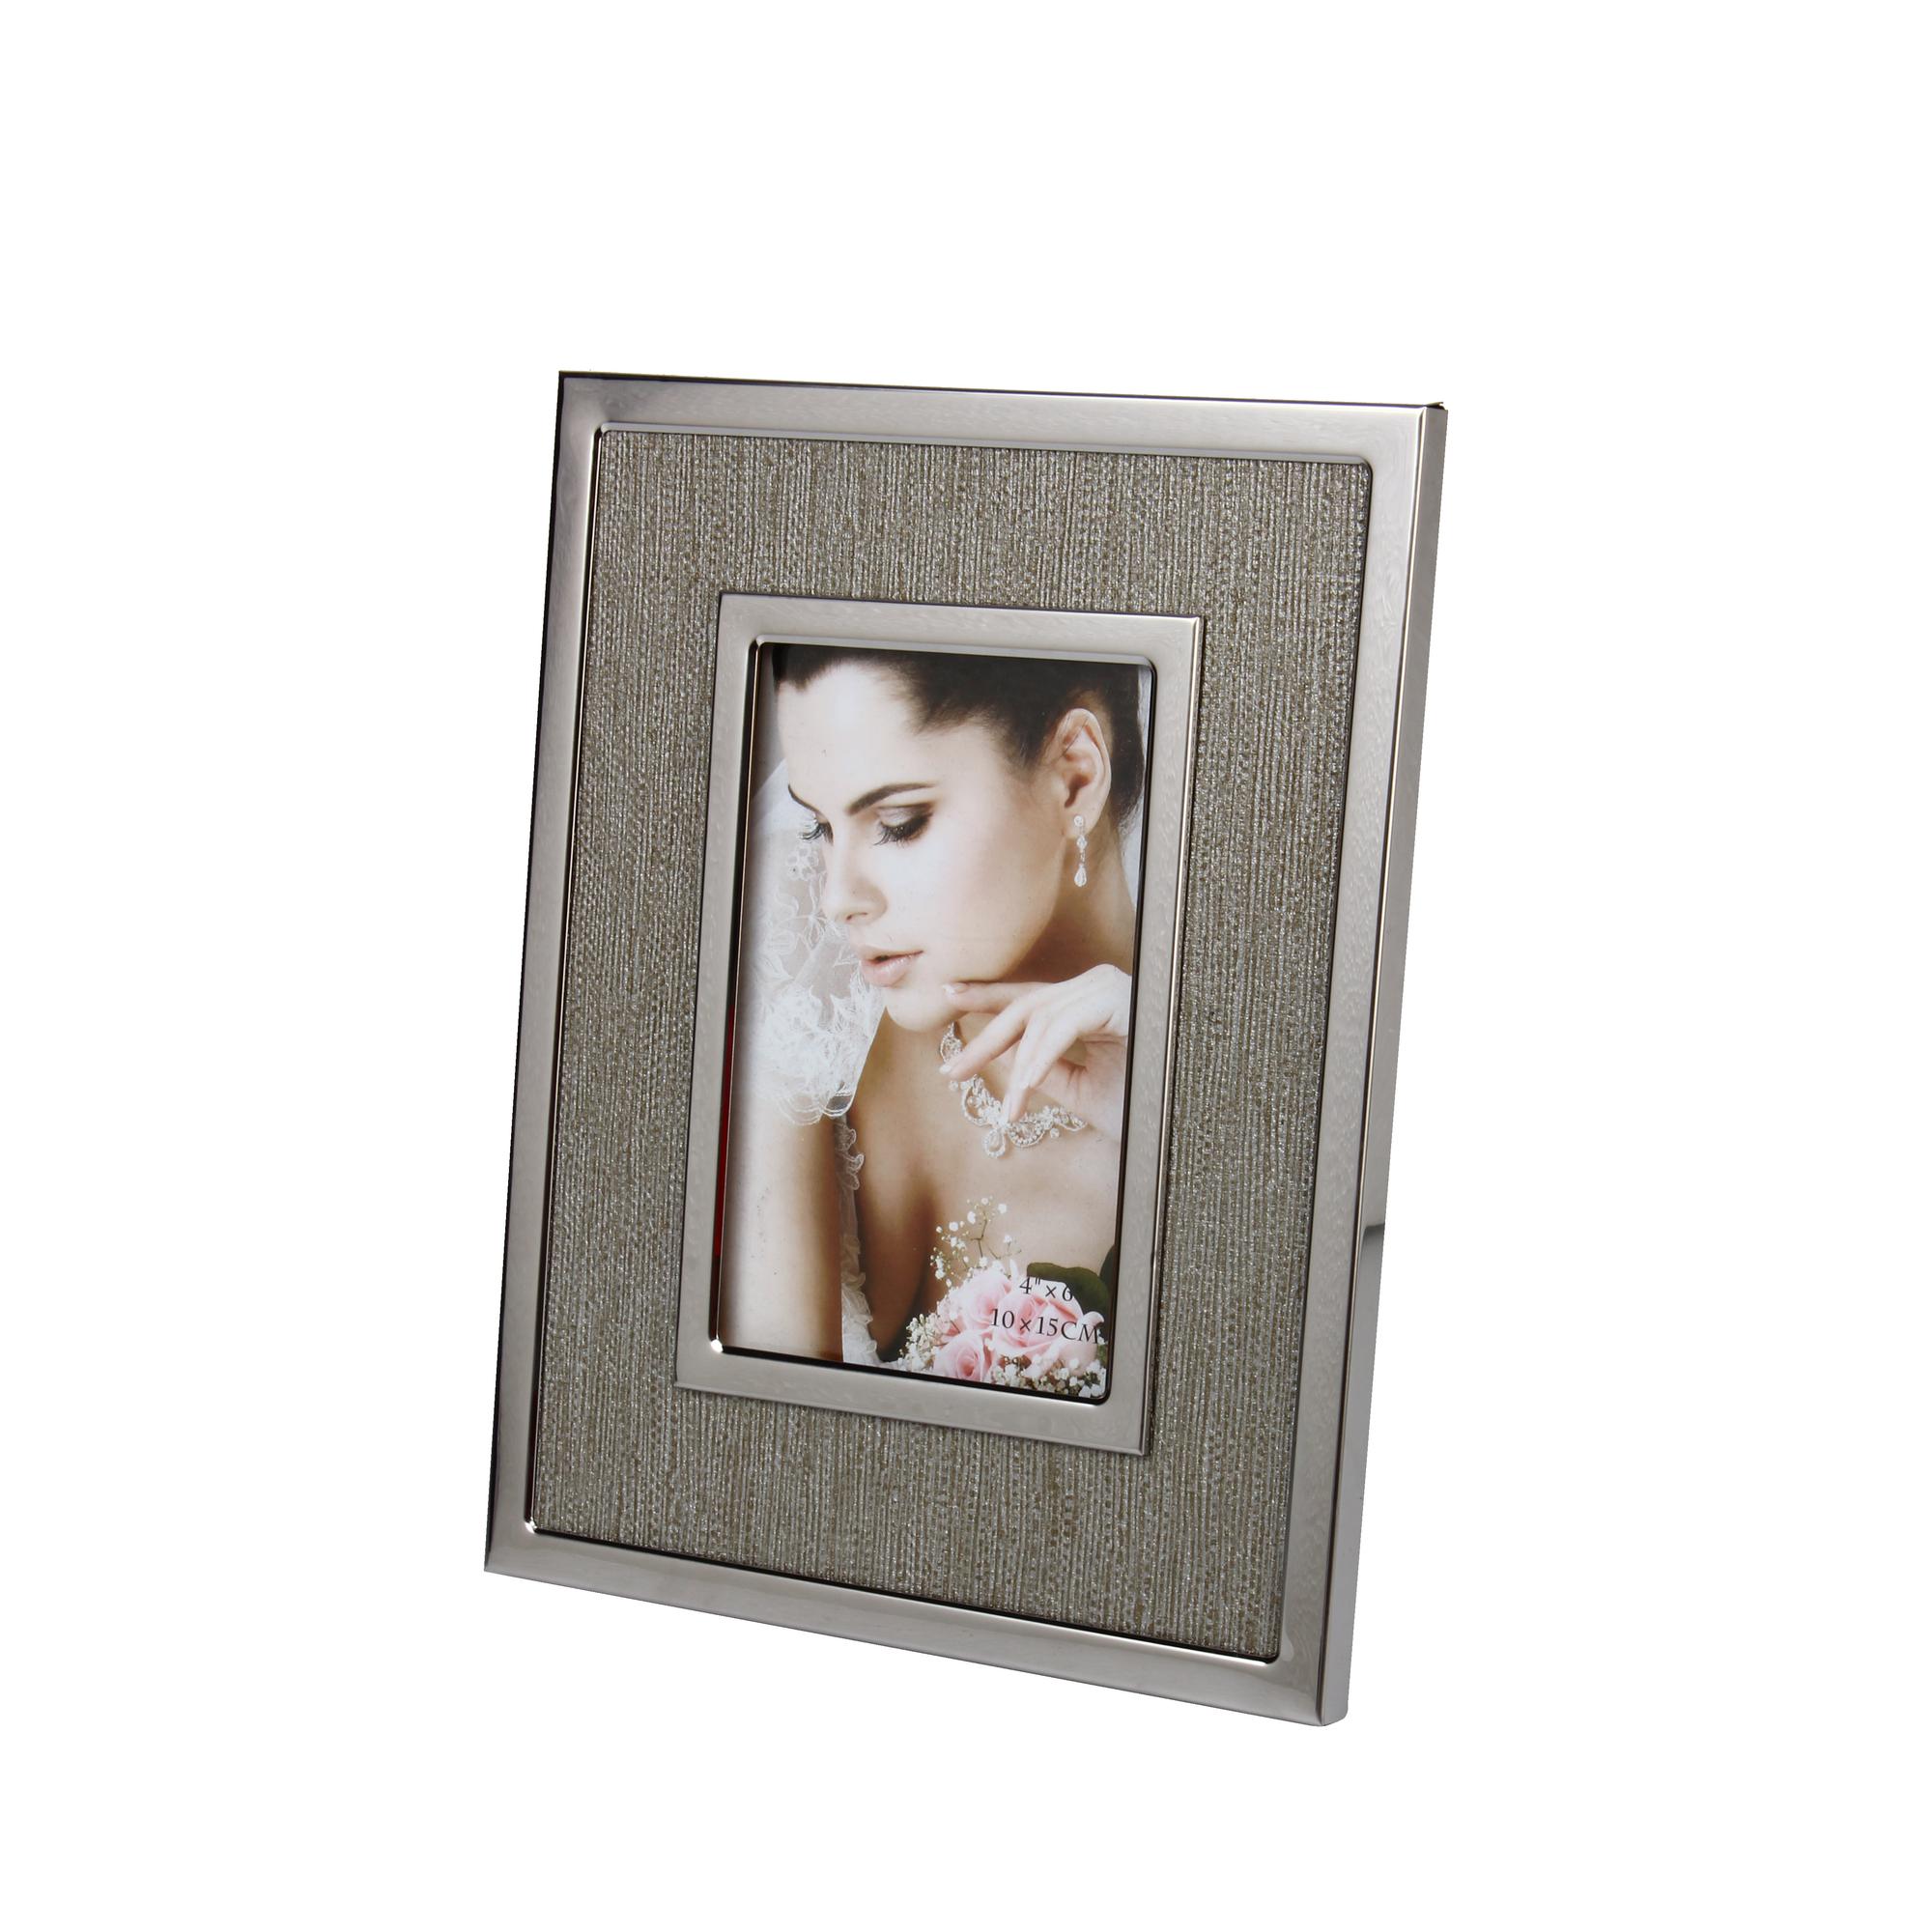 PICTURE FRAME 4X6 - 530-592981